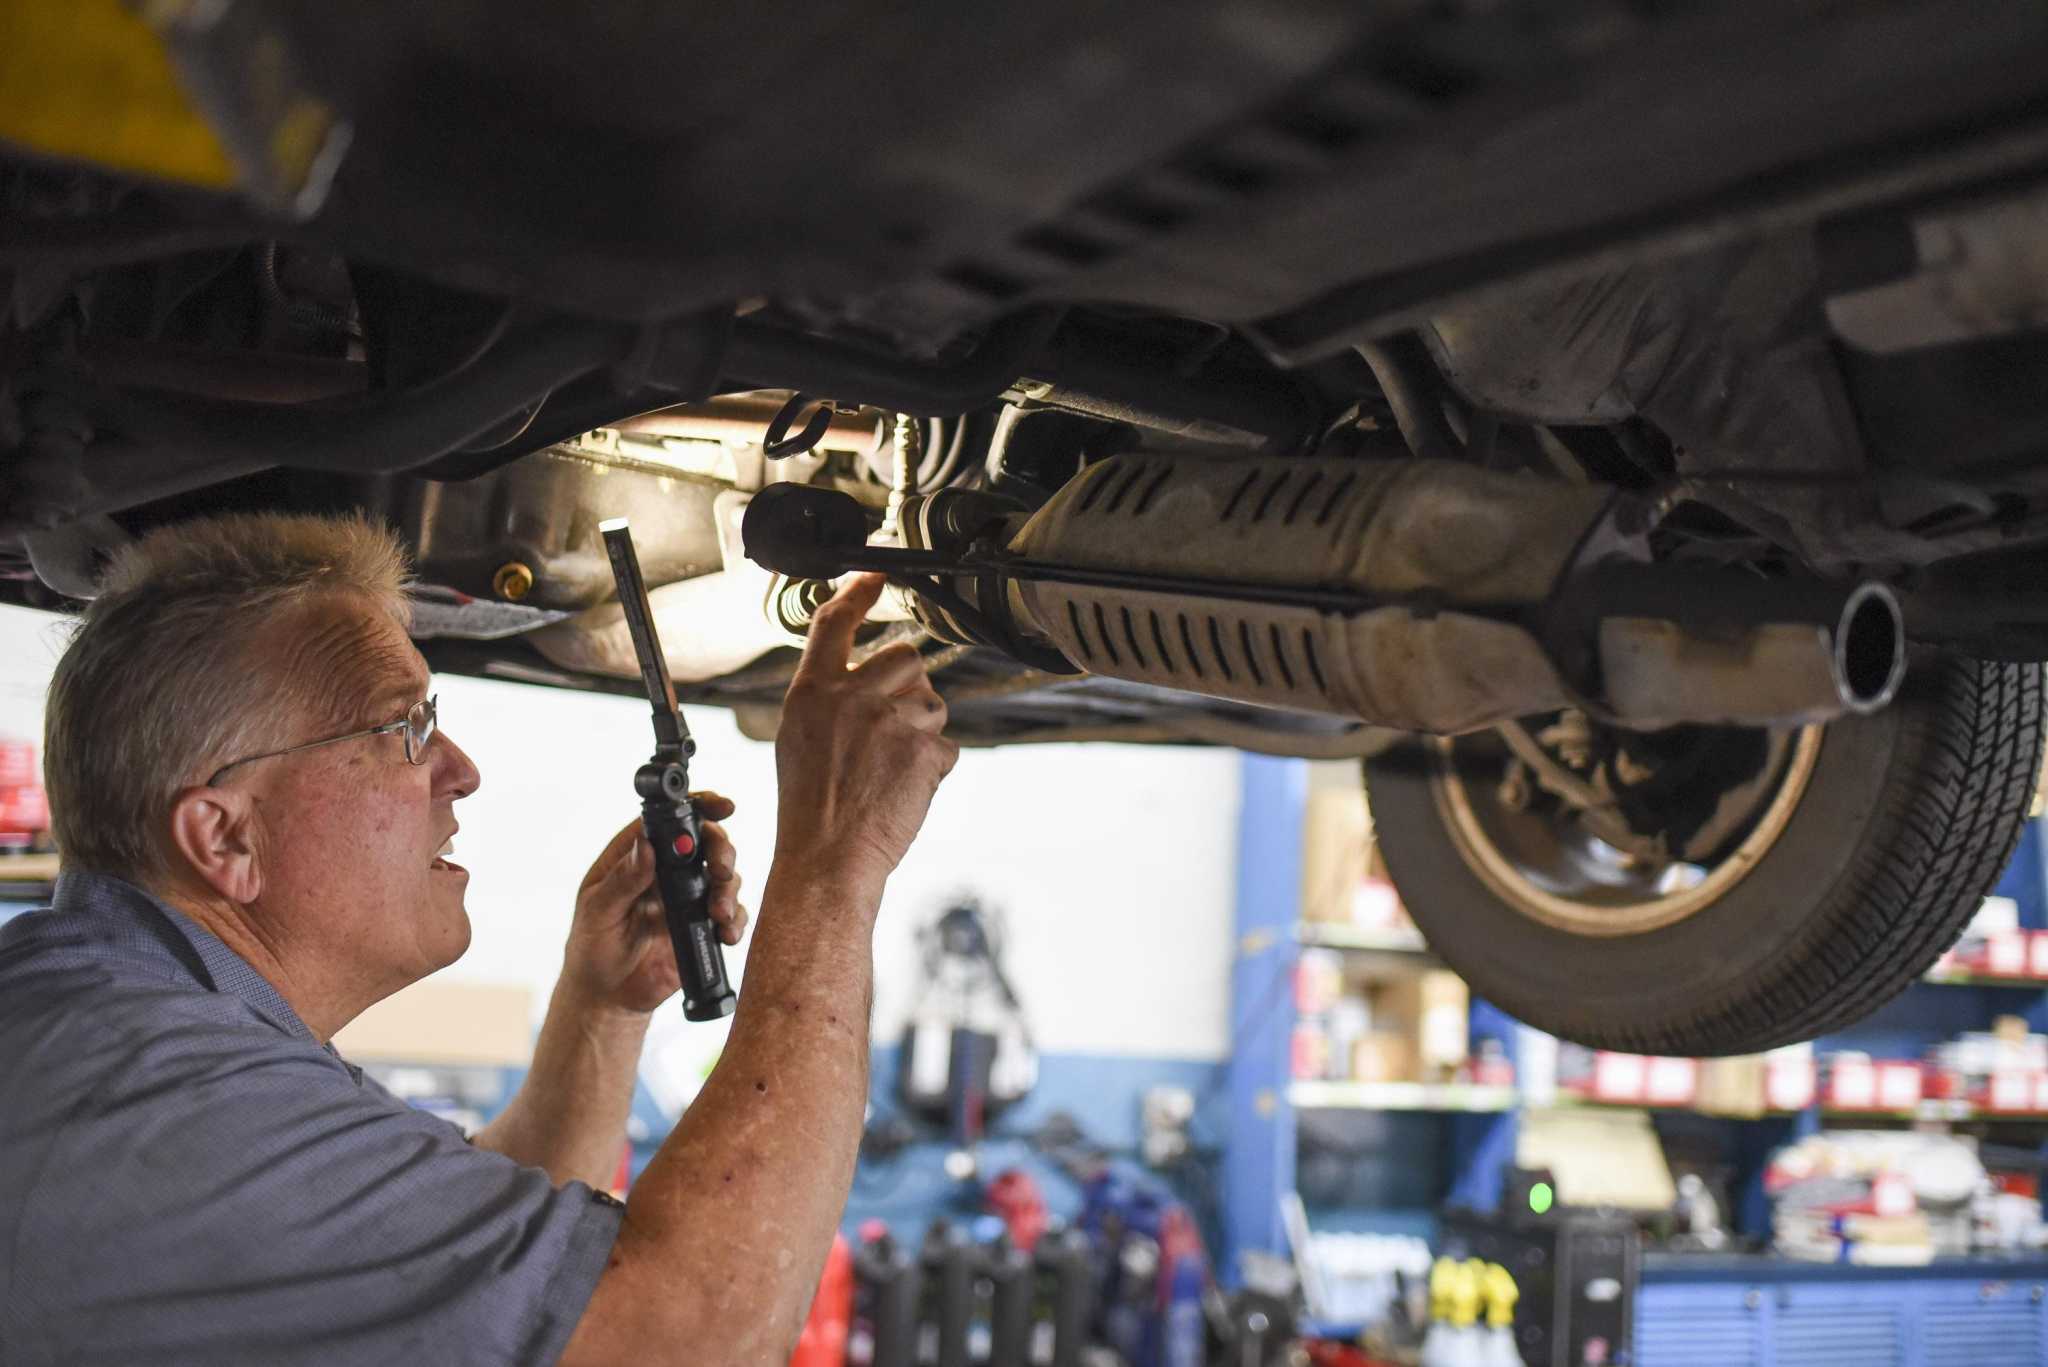 This Bay Area police department is giving away free kits to protect catalytic converters